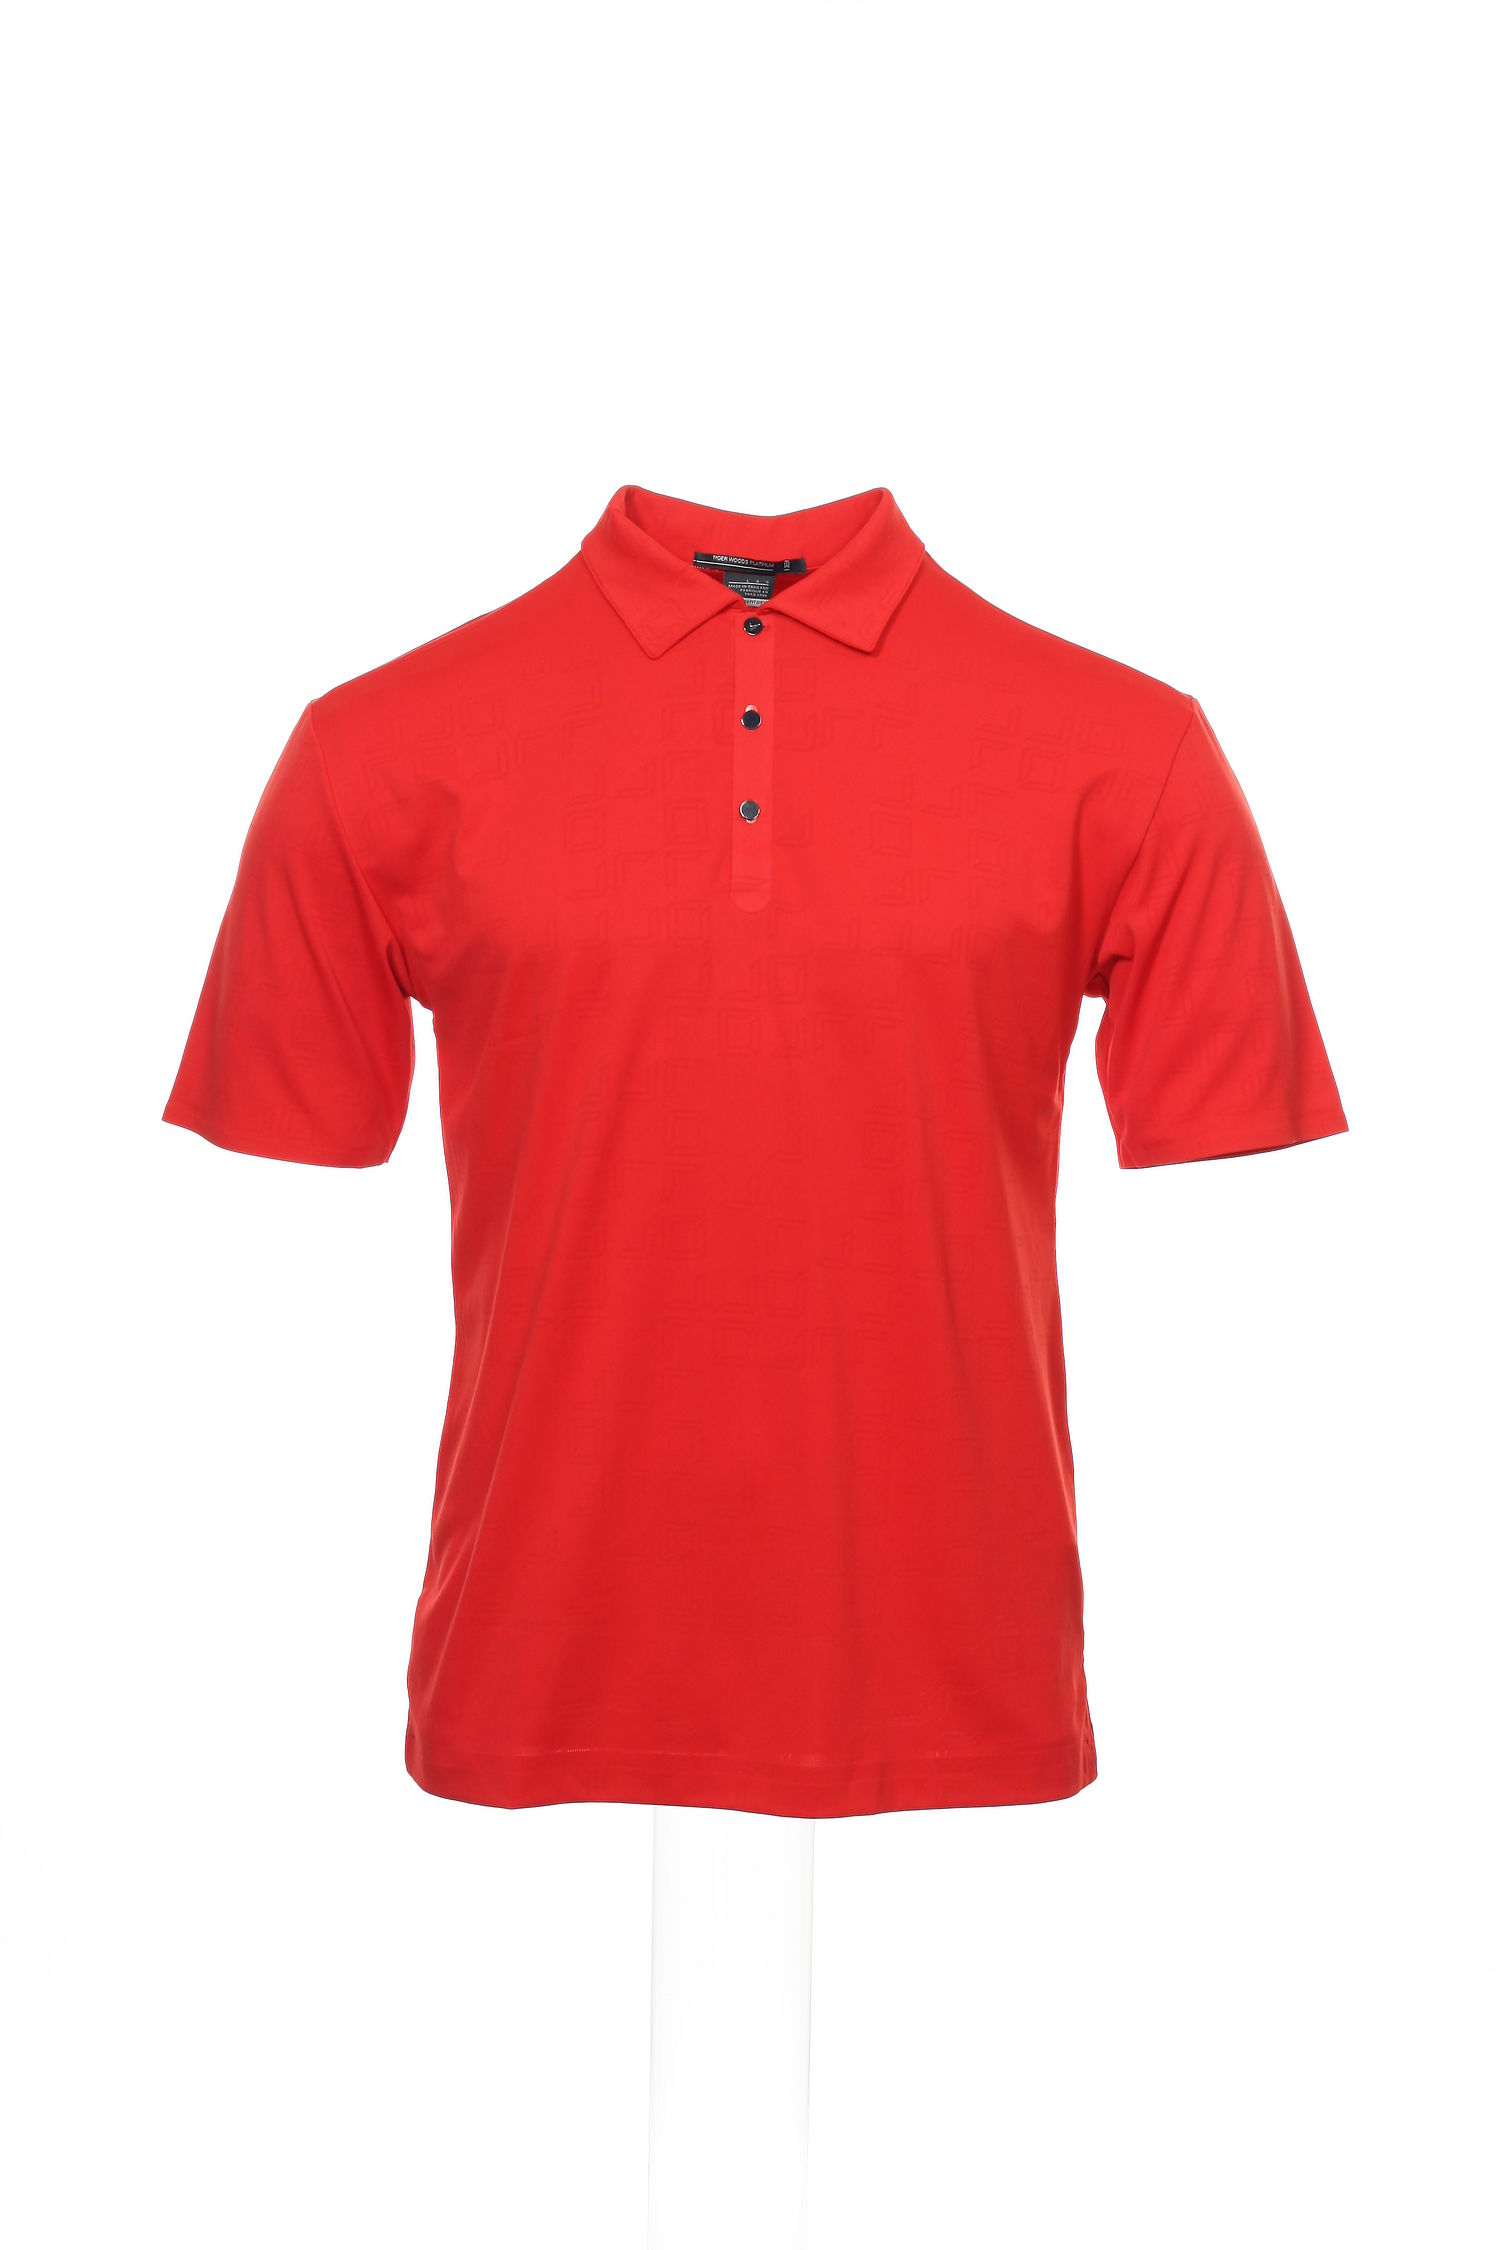 Tiger Woods Platinum by Nike Red Polo Shirt